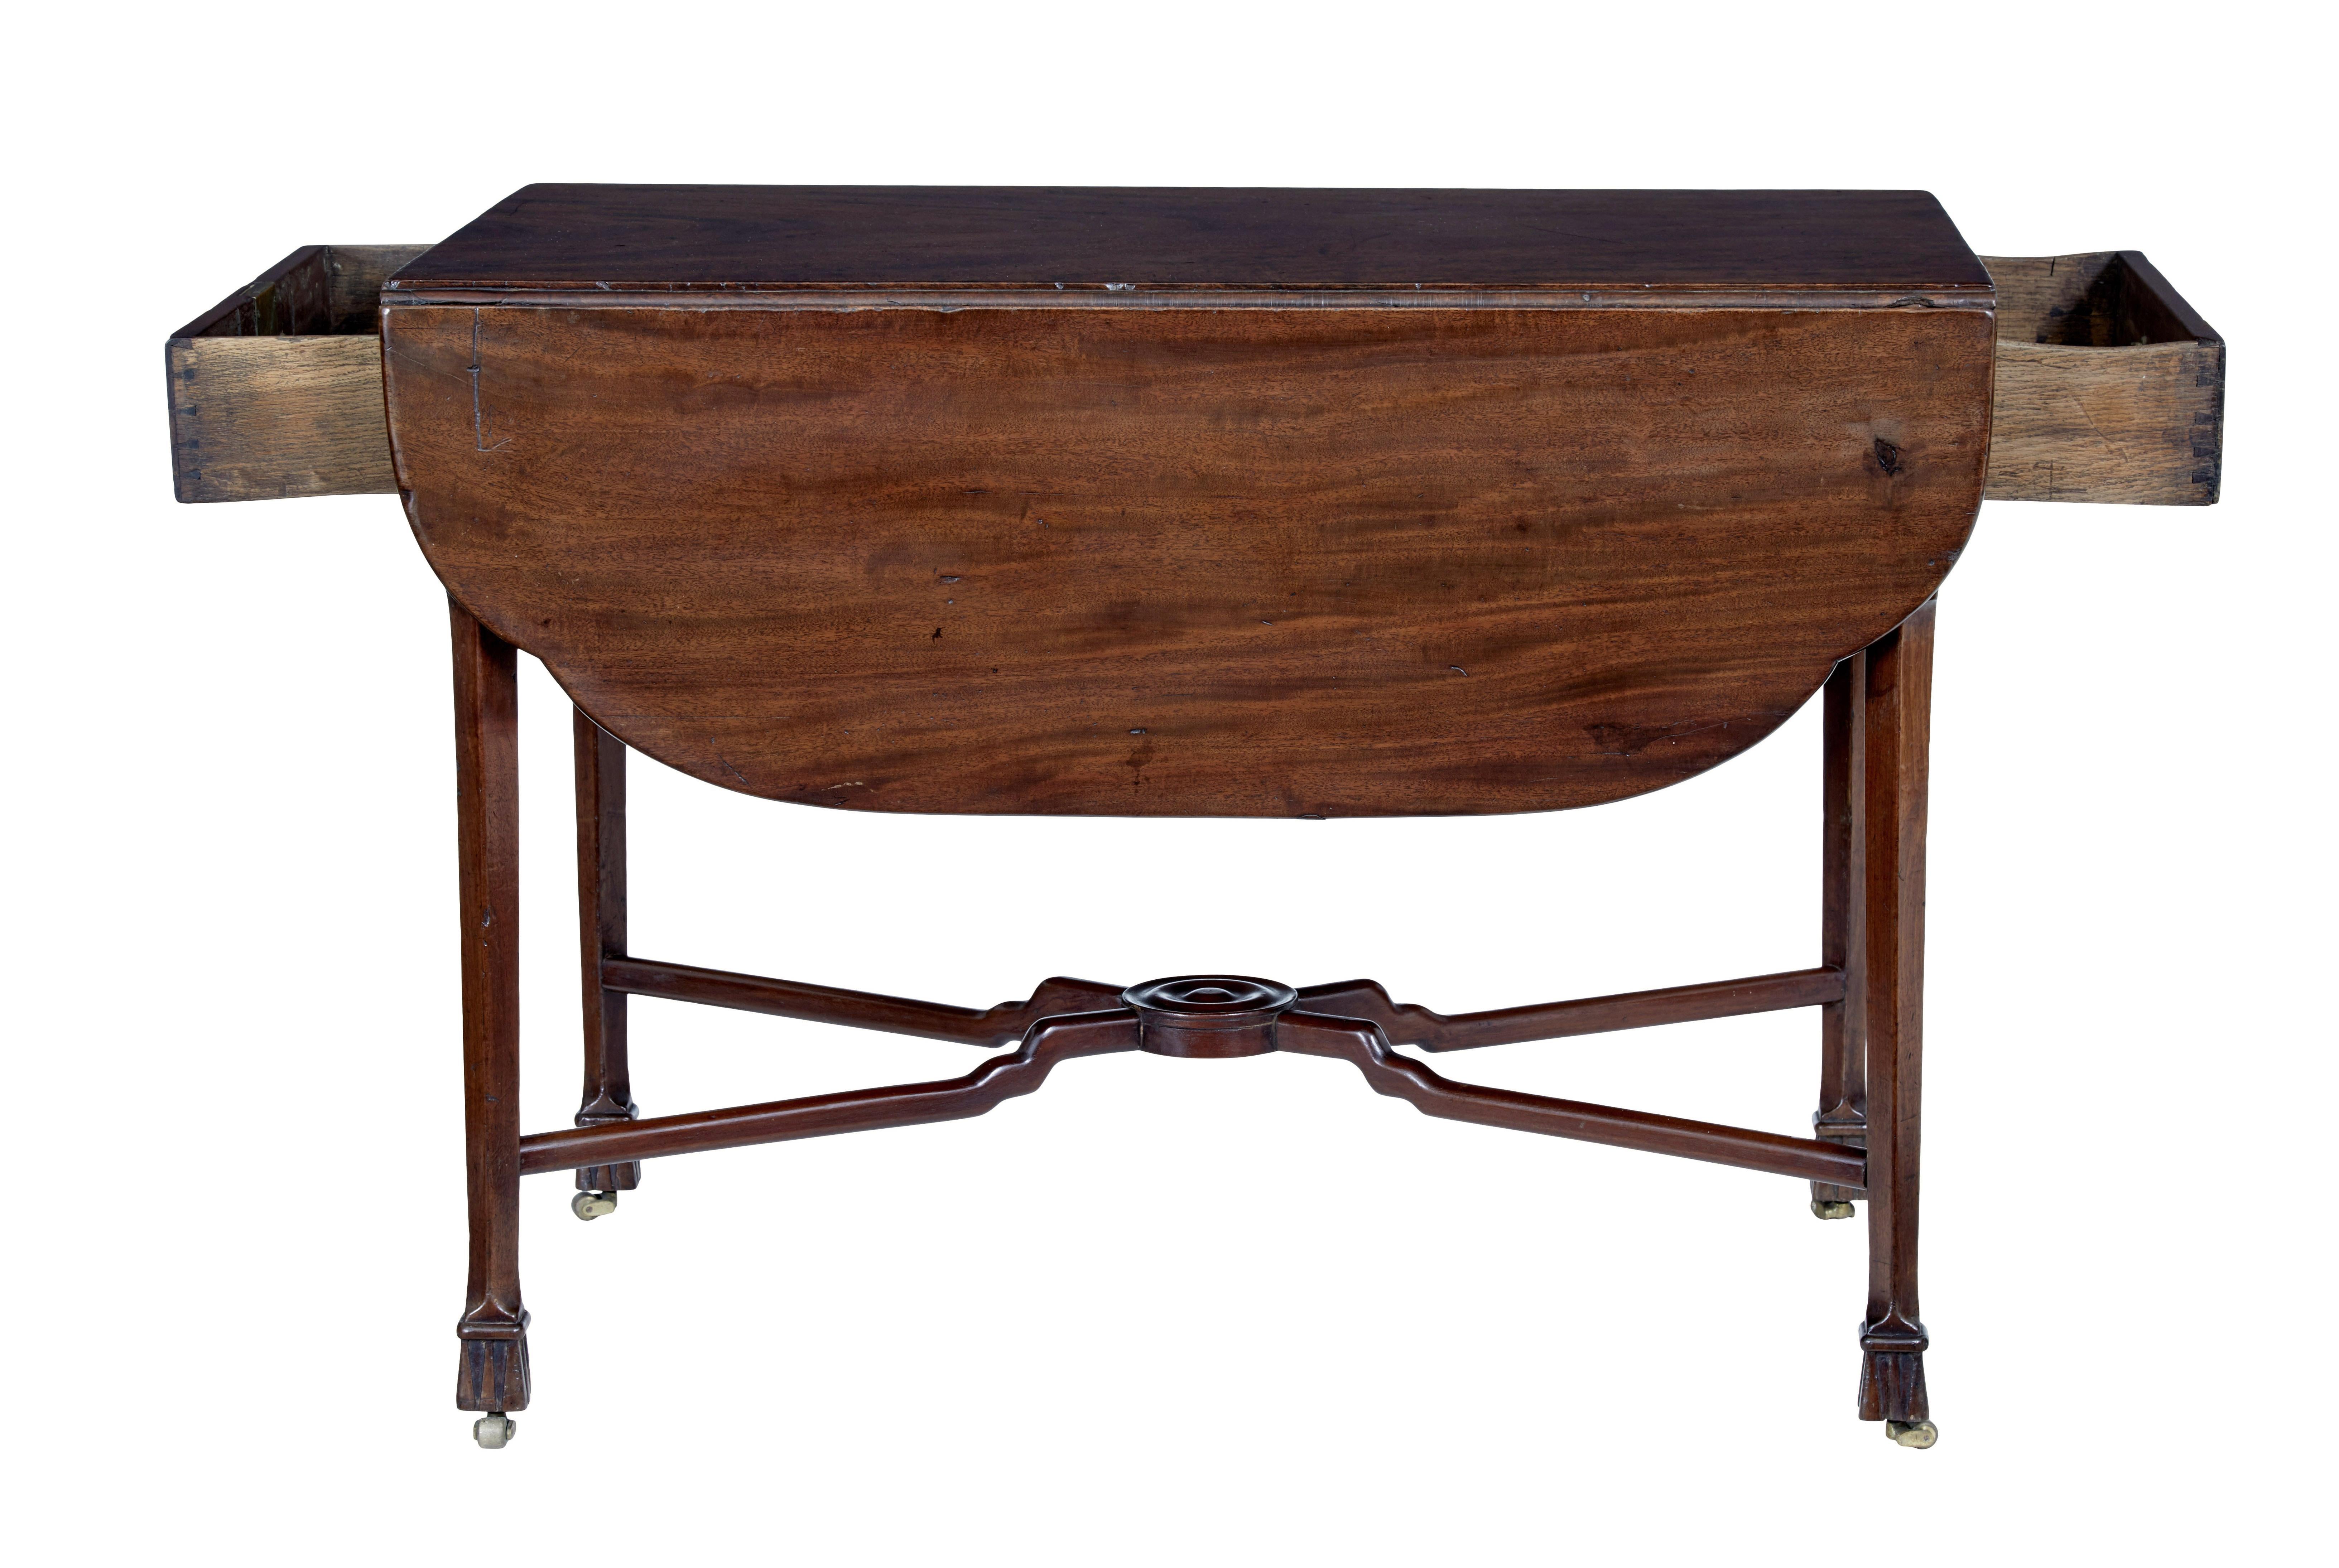 English 18th Century chippendale mahogany pembroke table For Sale